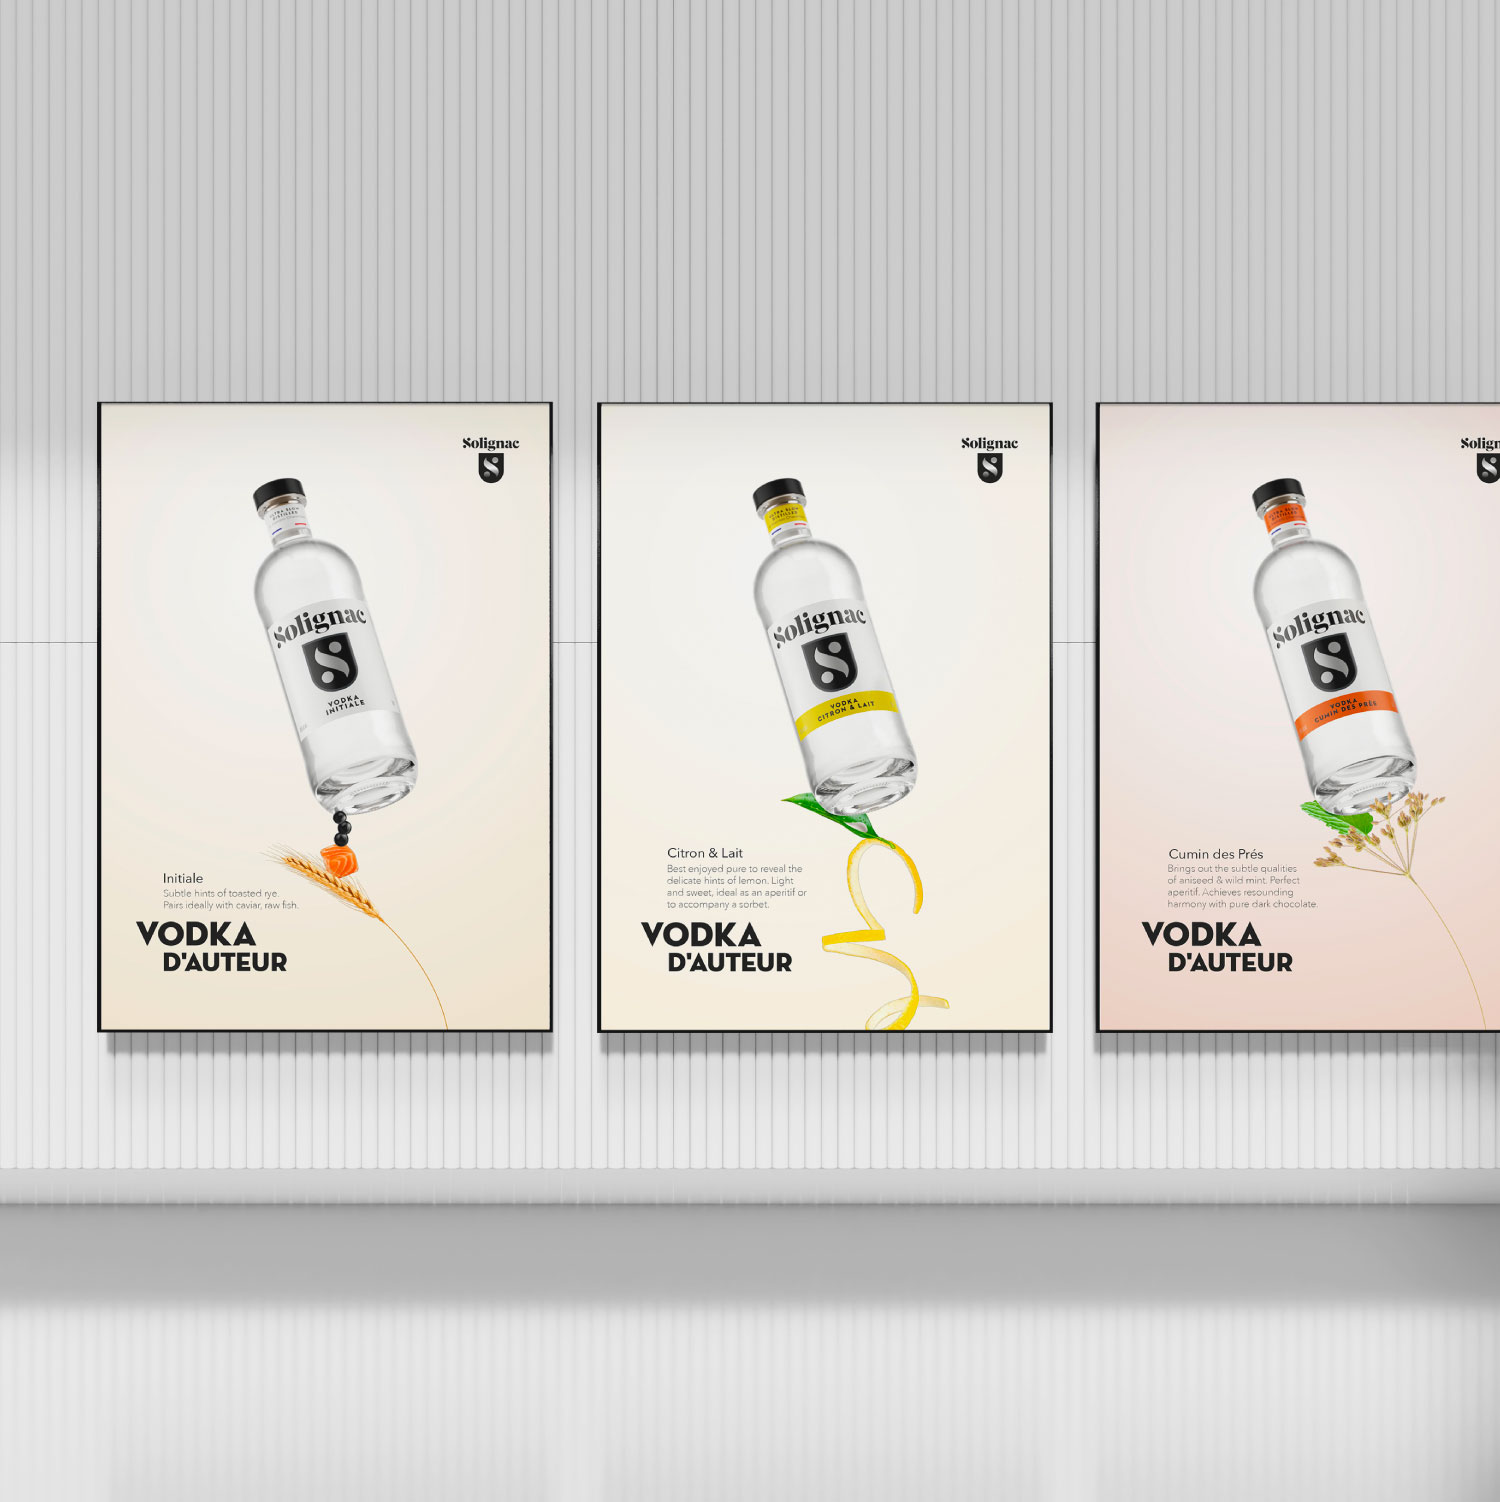 Solignac Premium French Vodka Strategy and Visual Branding by DDH